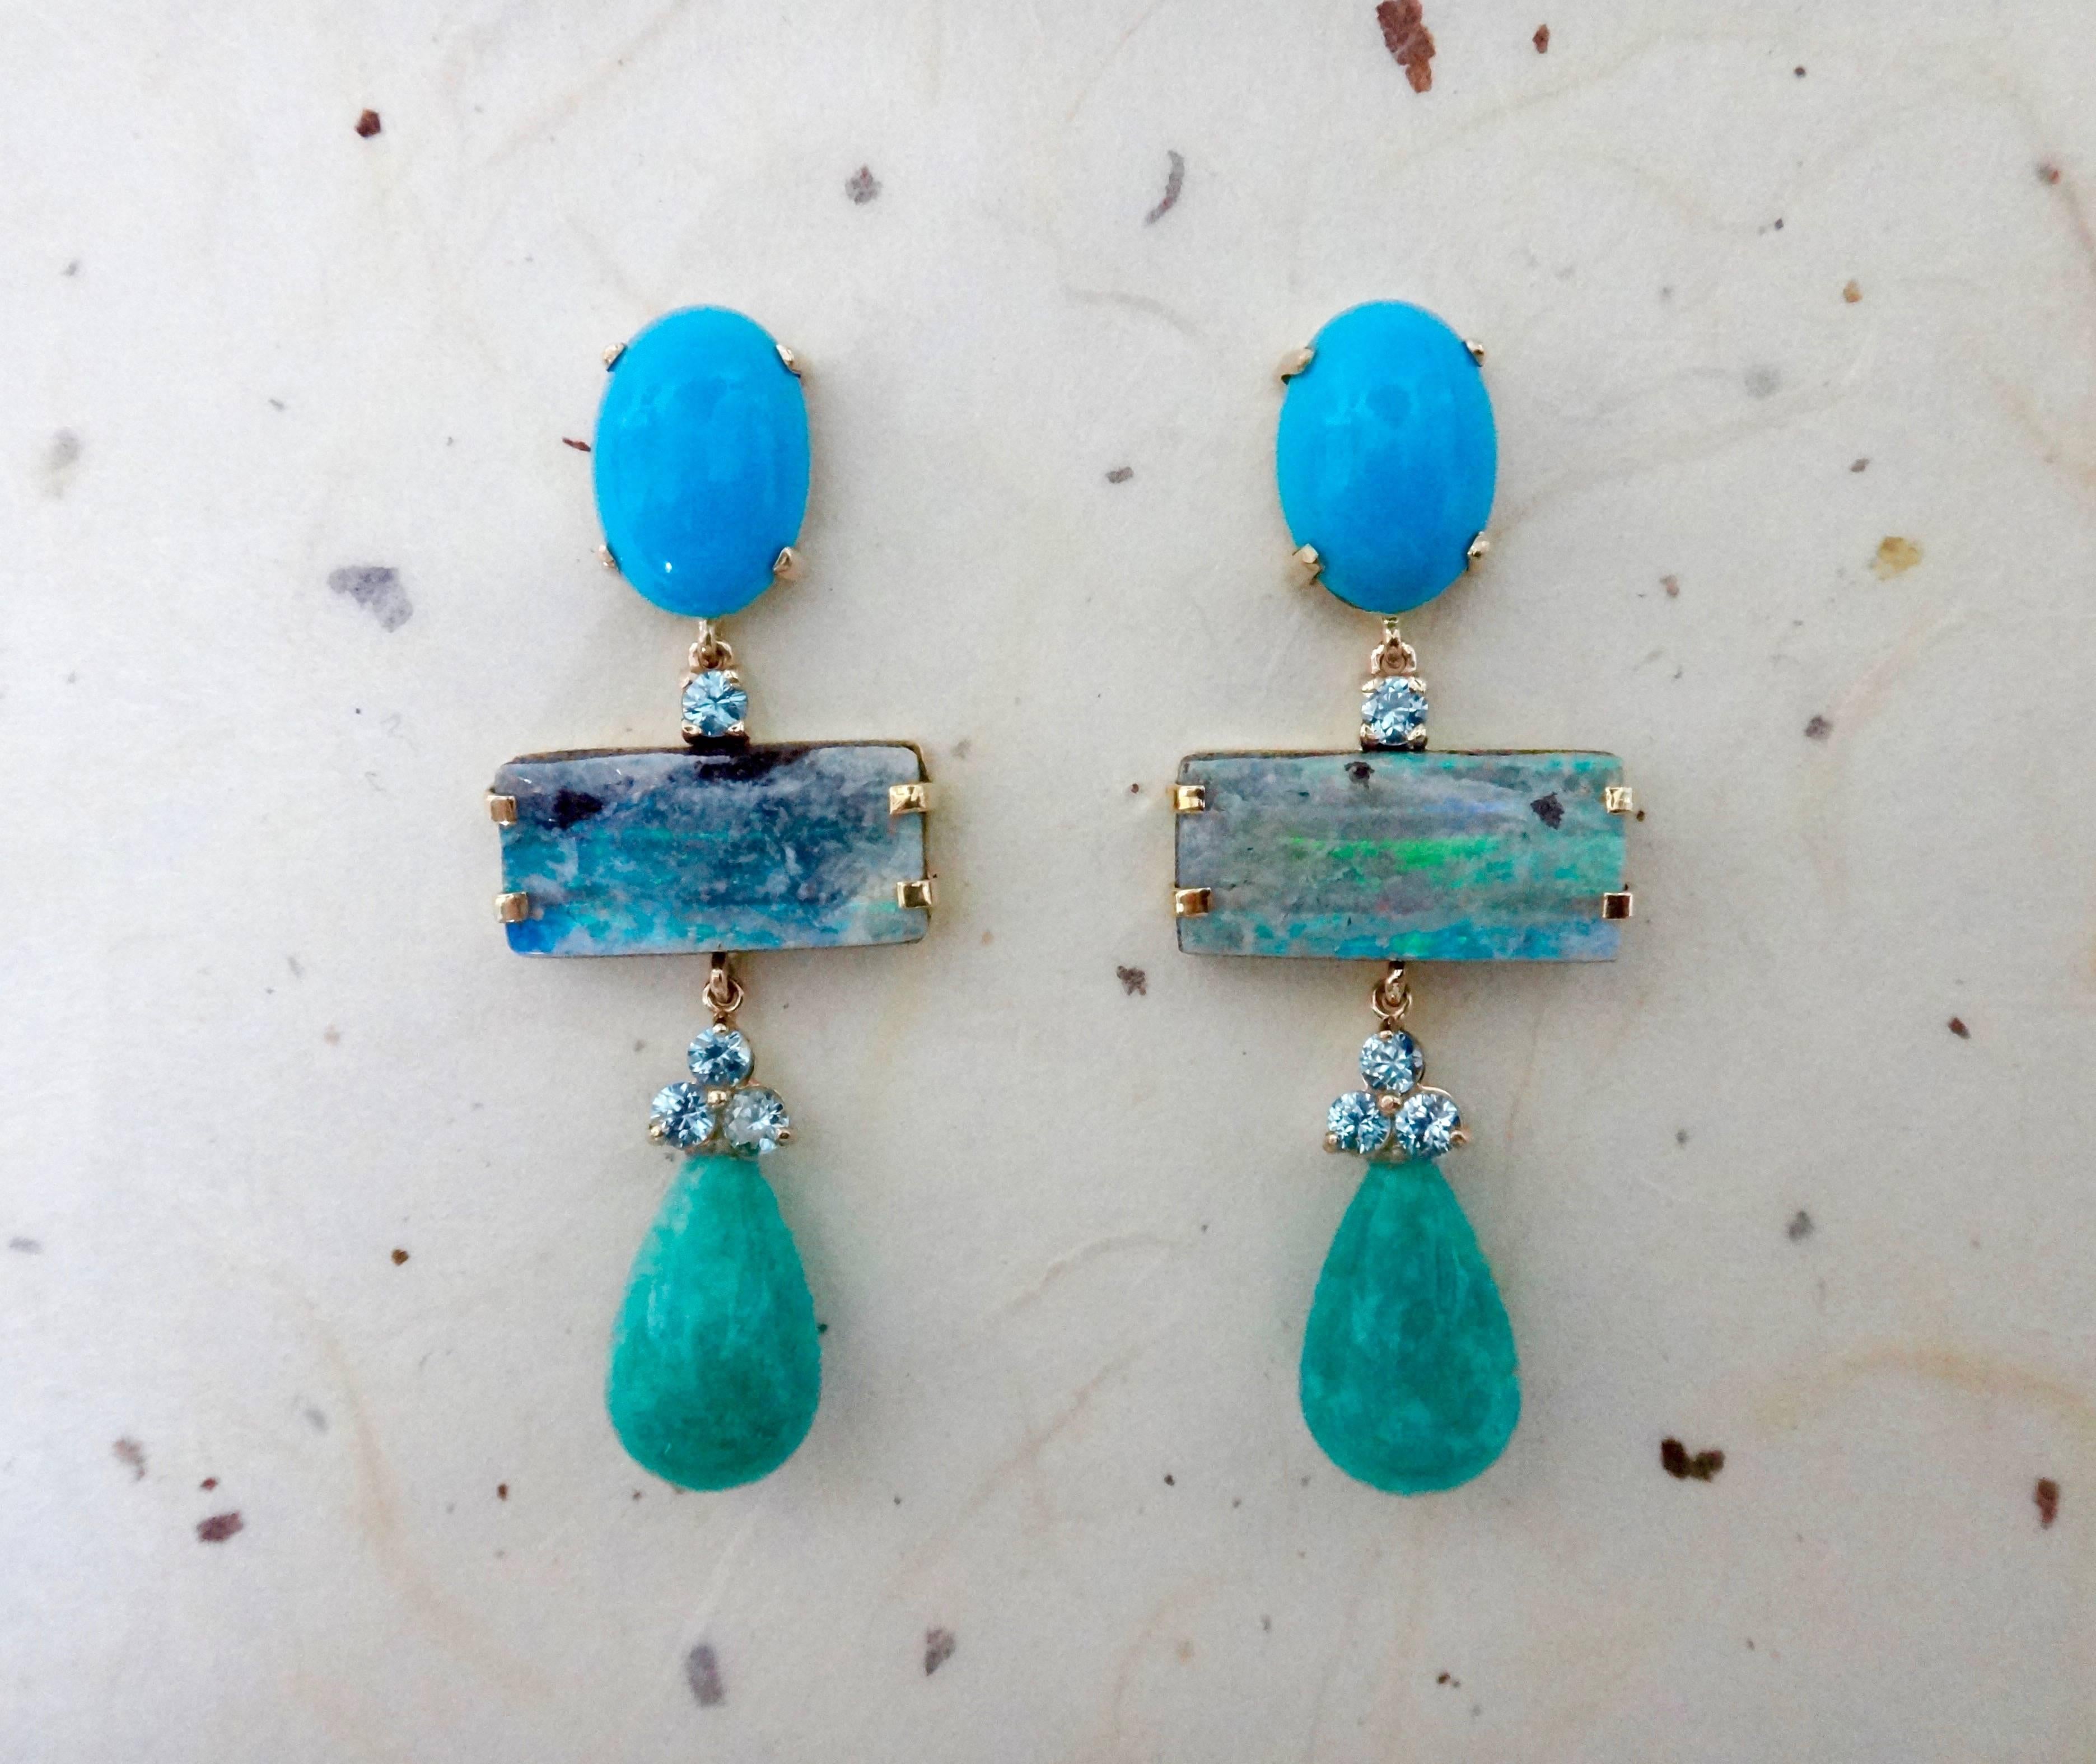 Sleeping Beauty turquoise forms the anchors for these monochromatic dangle earrings.  Complimenting the turquoise are brilliant cut blue zircons (Myanmar), Boulder Opals (Boulder opal is one of the most valuable varieties of opal, second only to